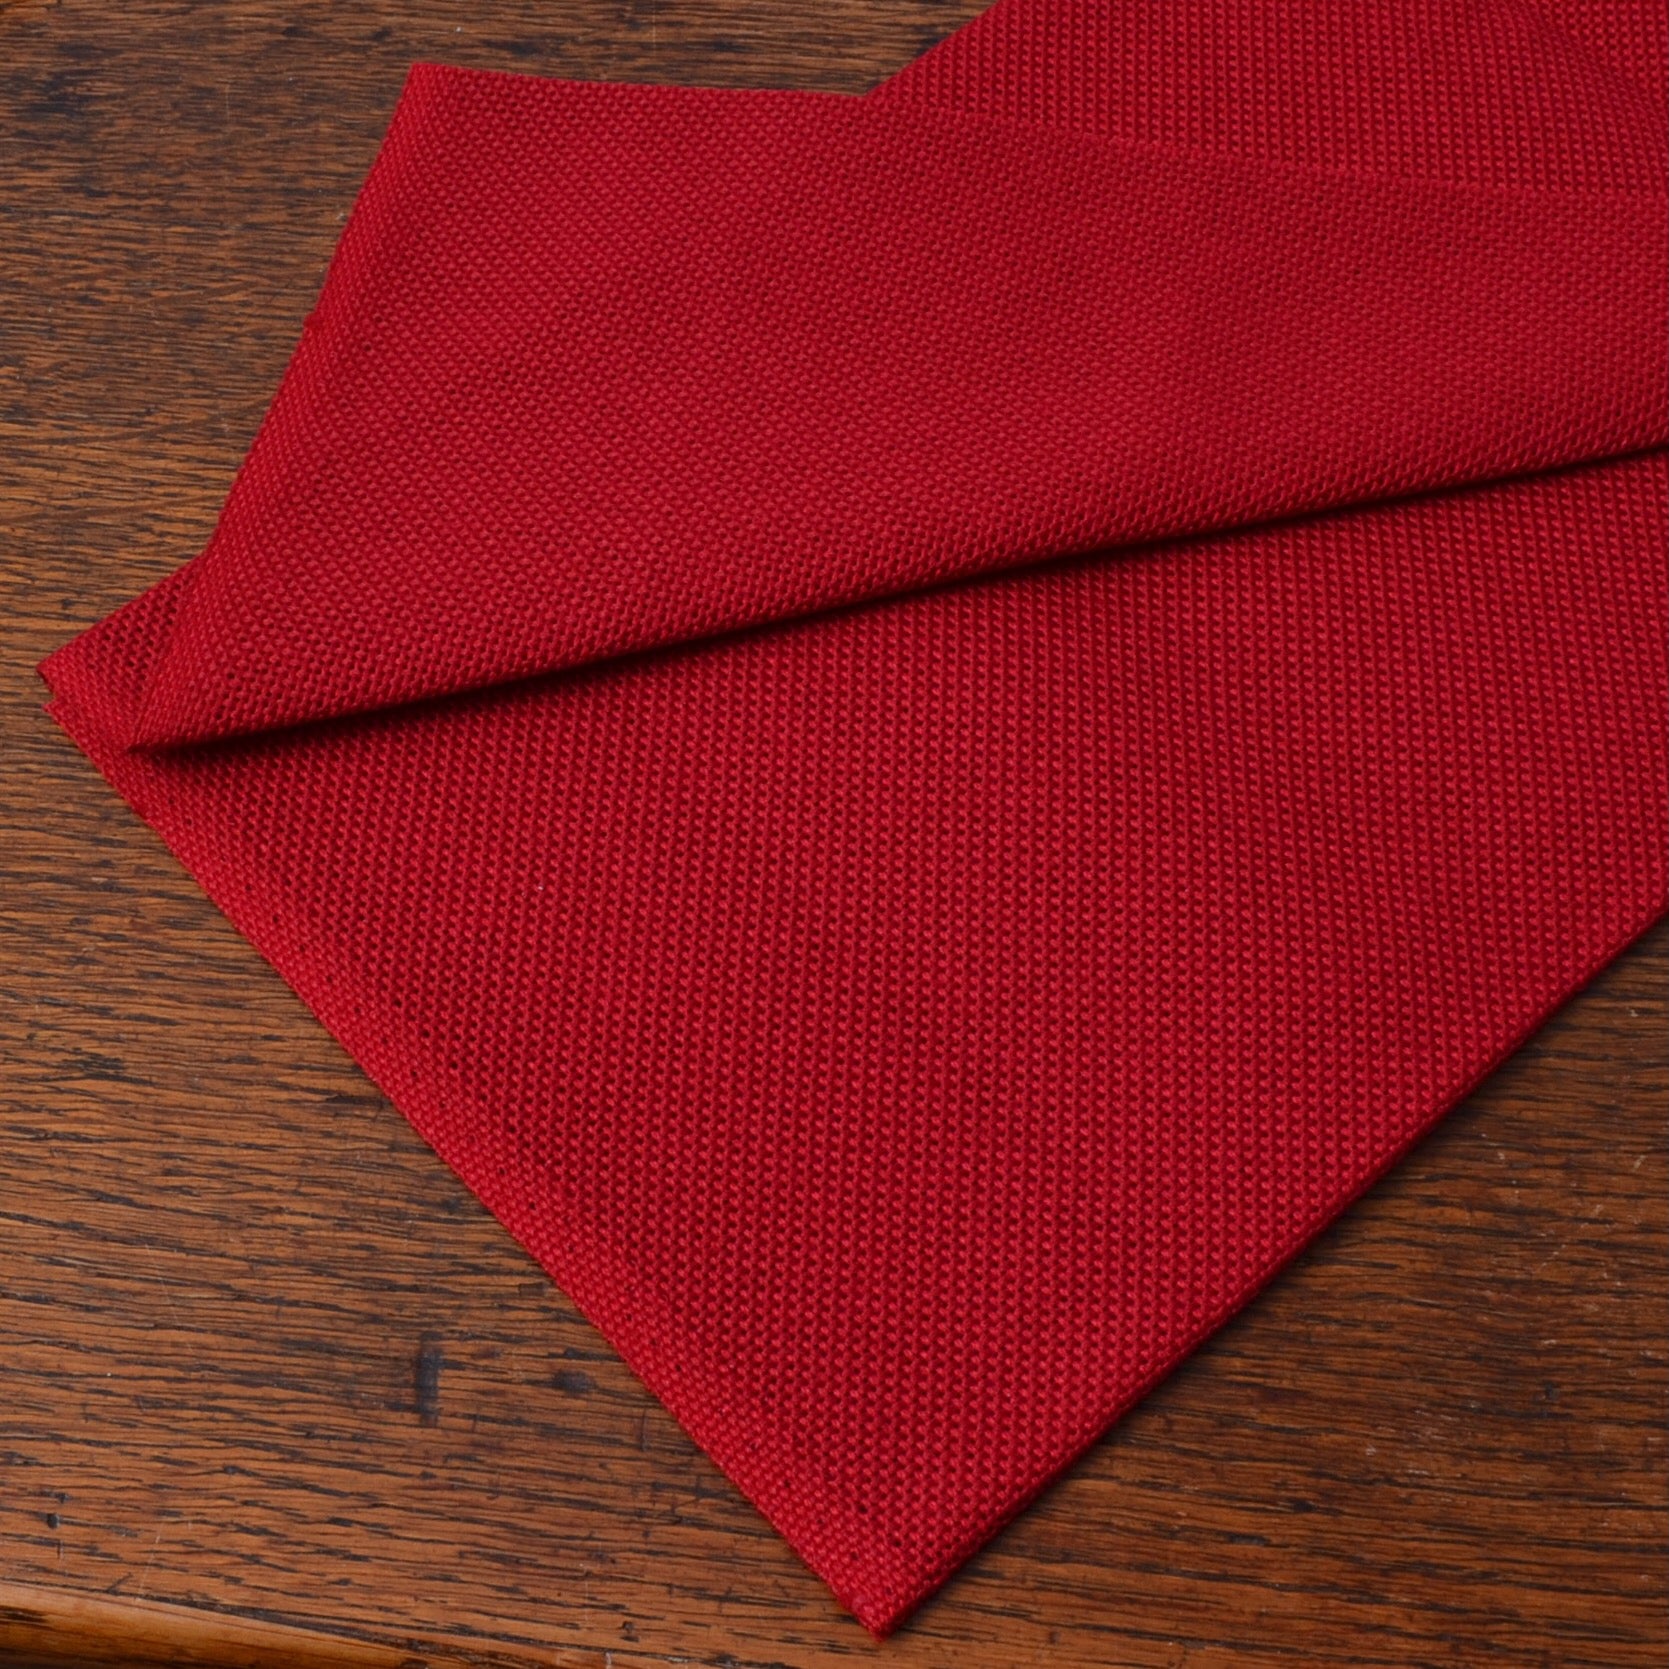 Kogin Stitching, 18 Count Red Congress Cloth